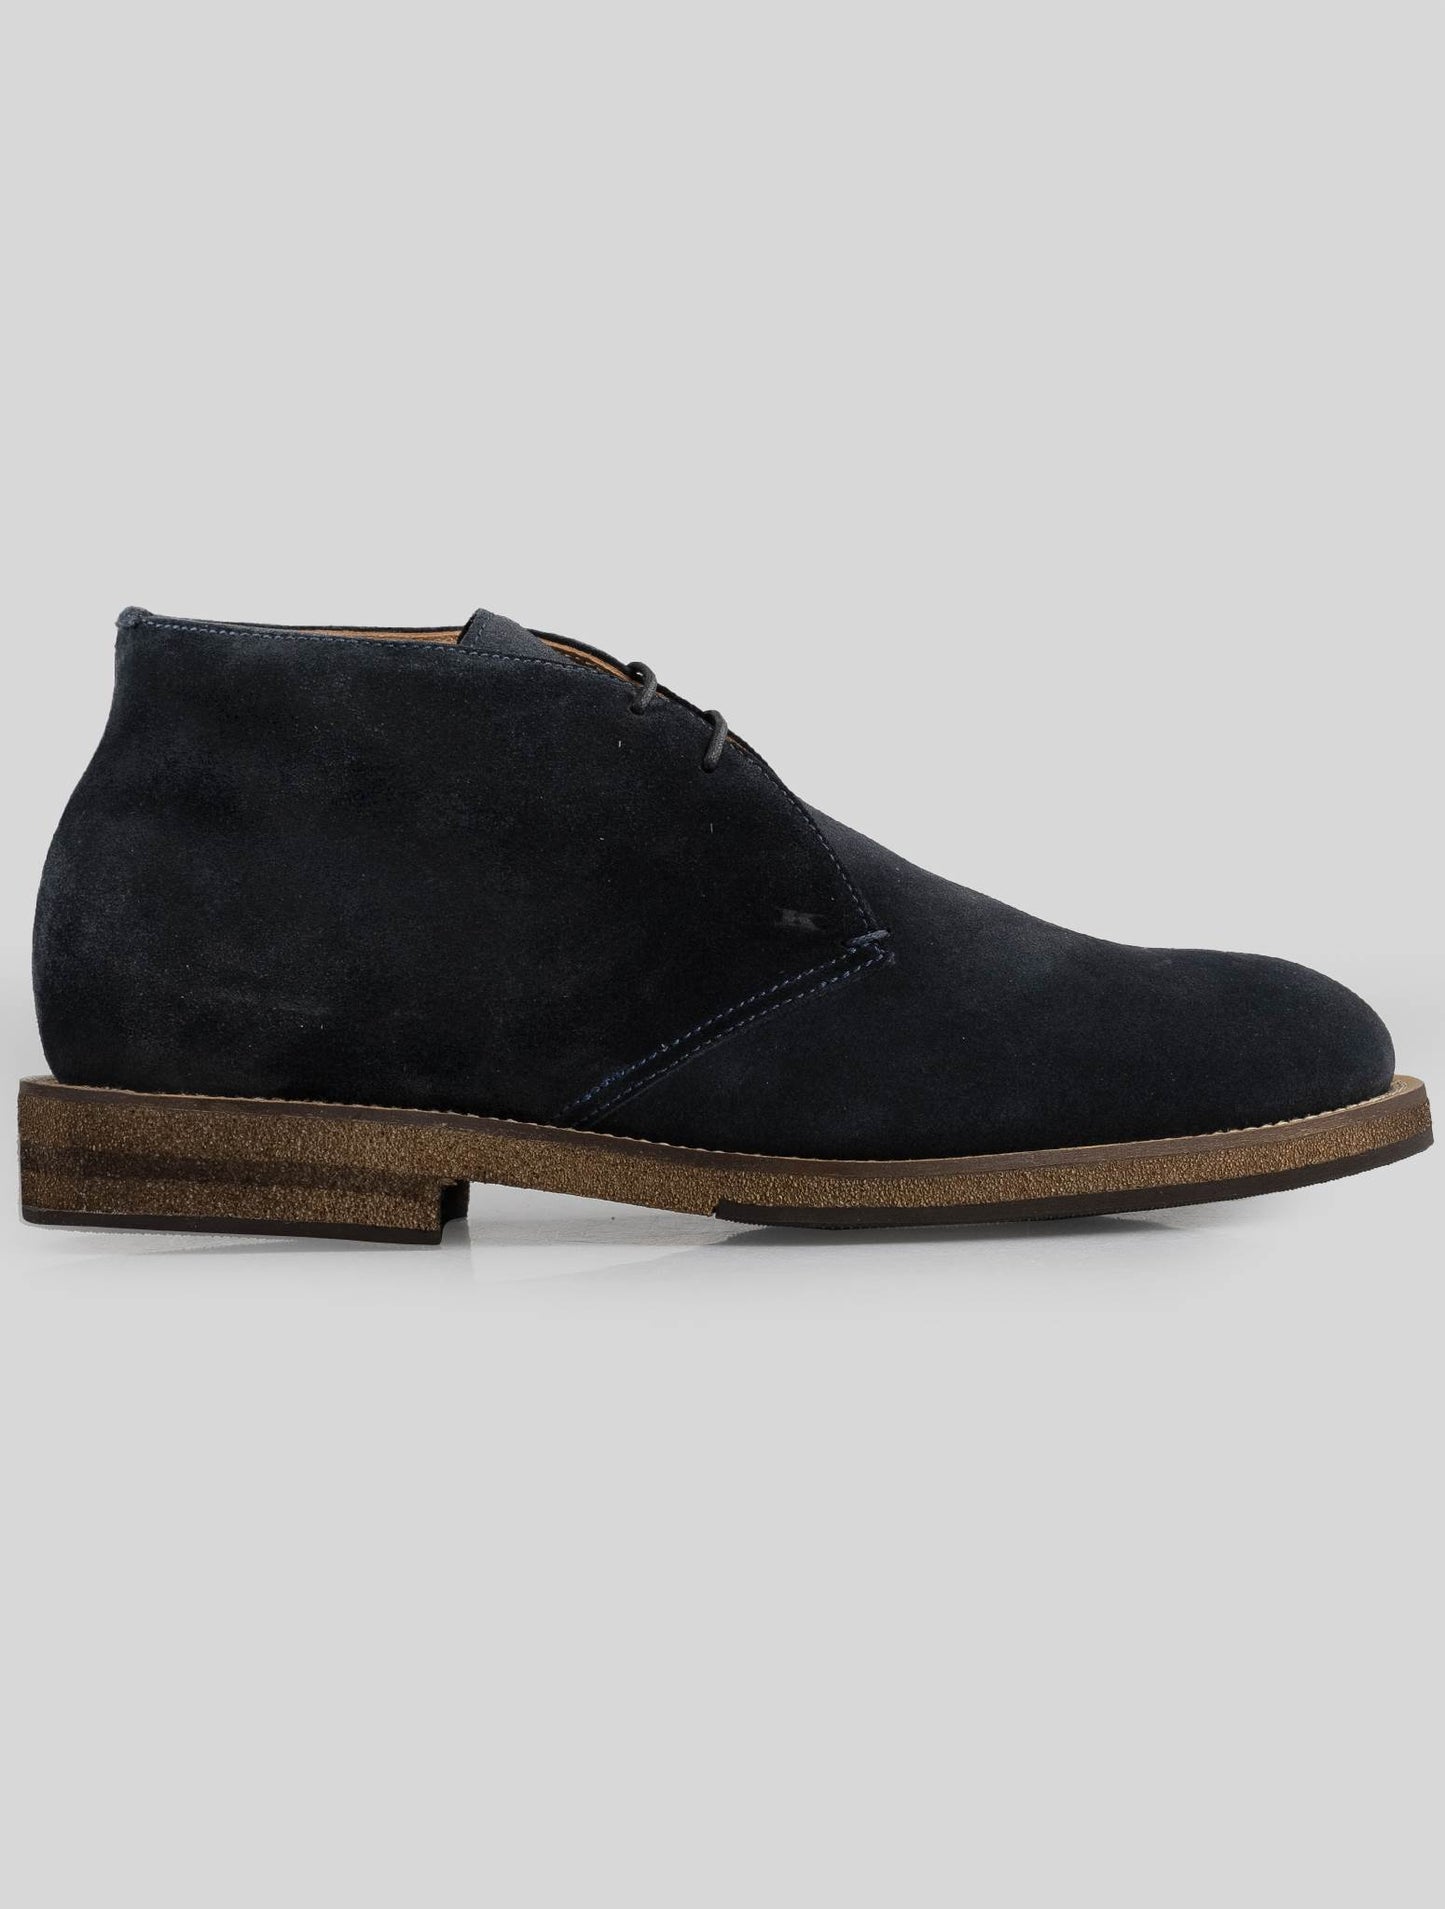 Kiton Blue Leather Suede Boots